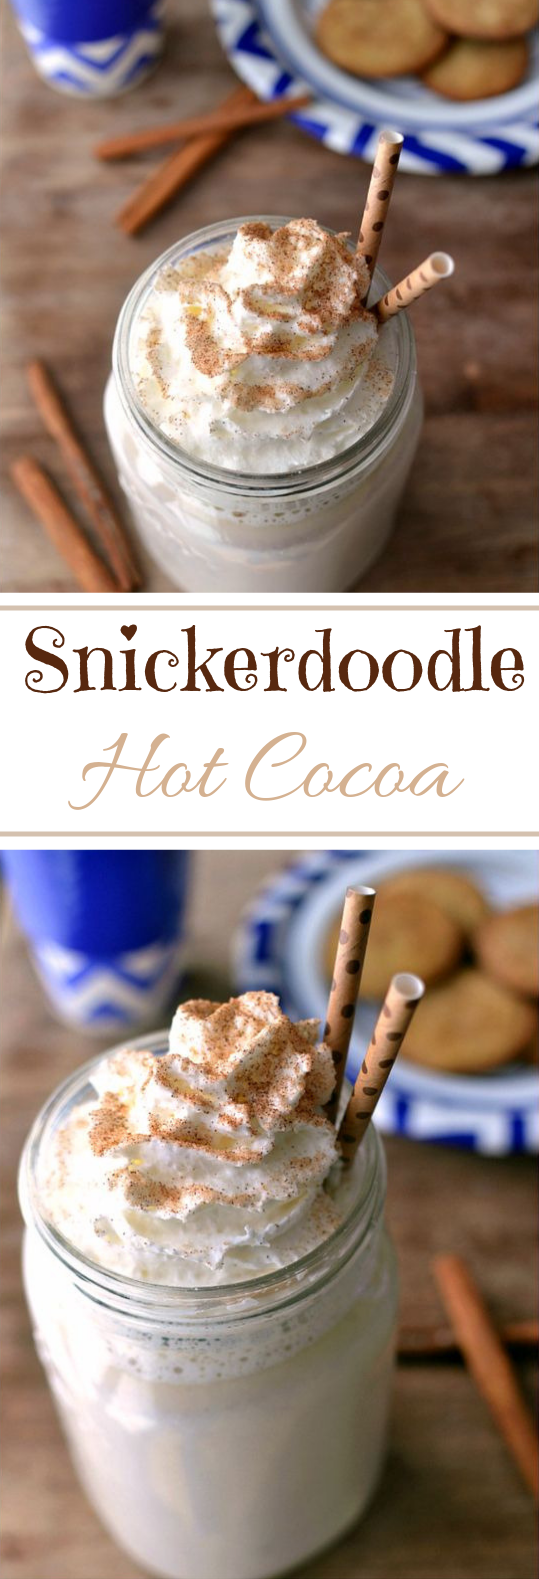 Snickerdoodle Hot Cocoa #winter #drinks